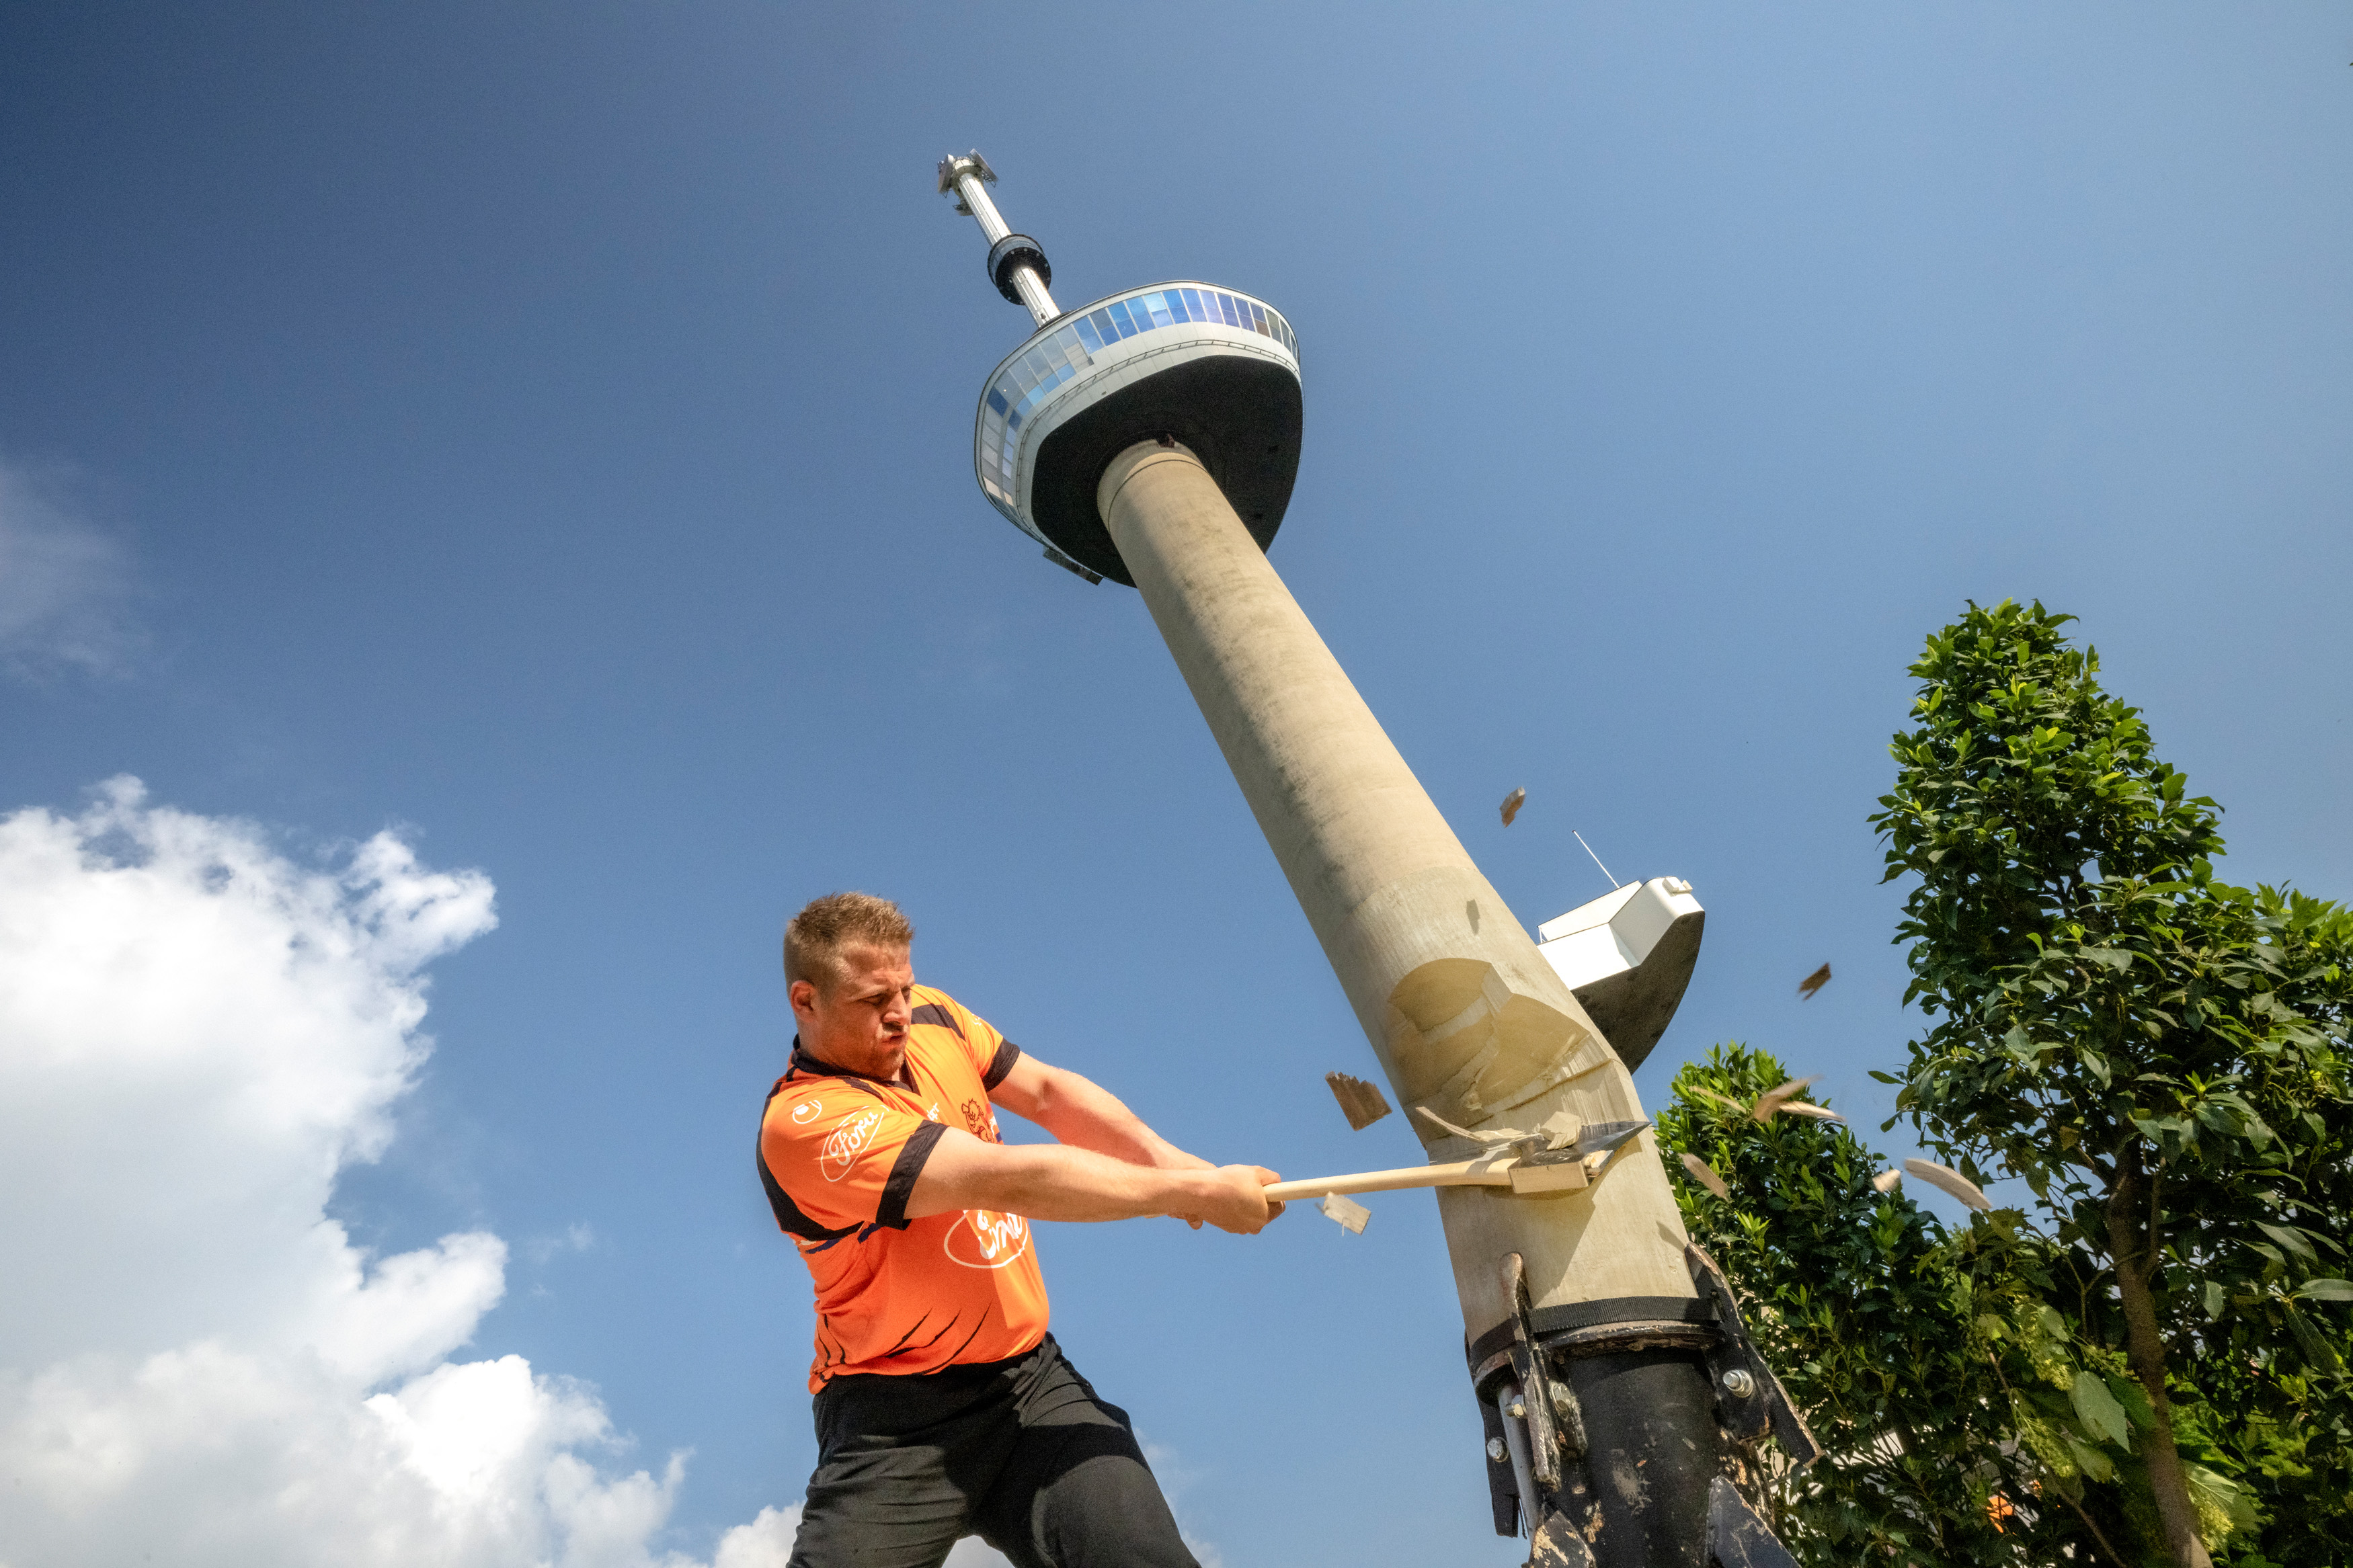 STIHL TIMBERSPORTS® Redmer Knol from the Netherlands symbolically chops down the Euromast Tower in Rotterdam